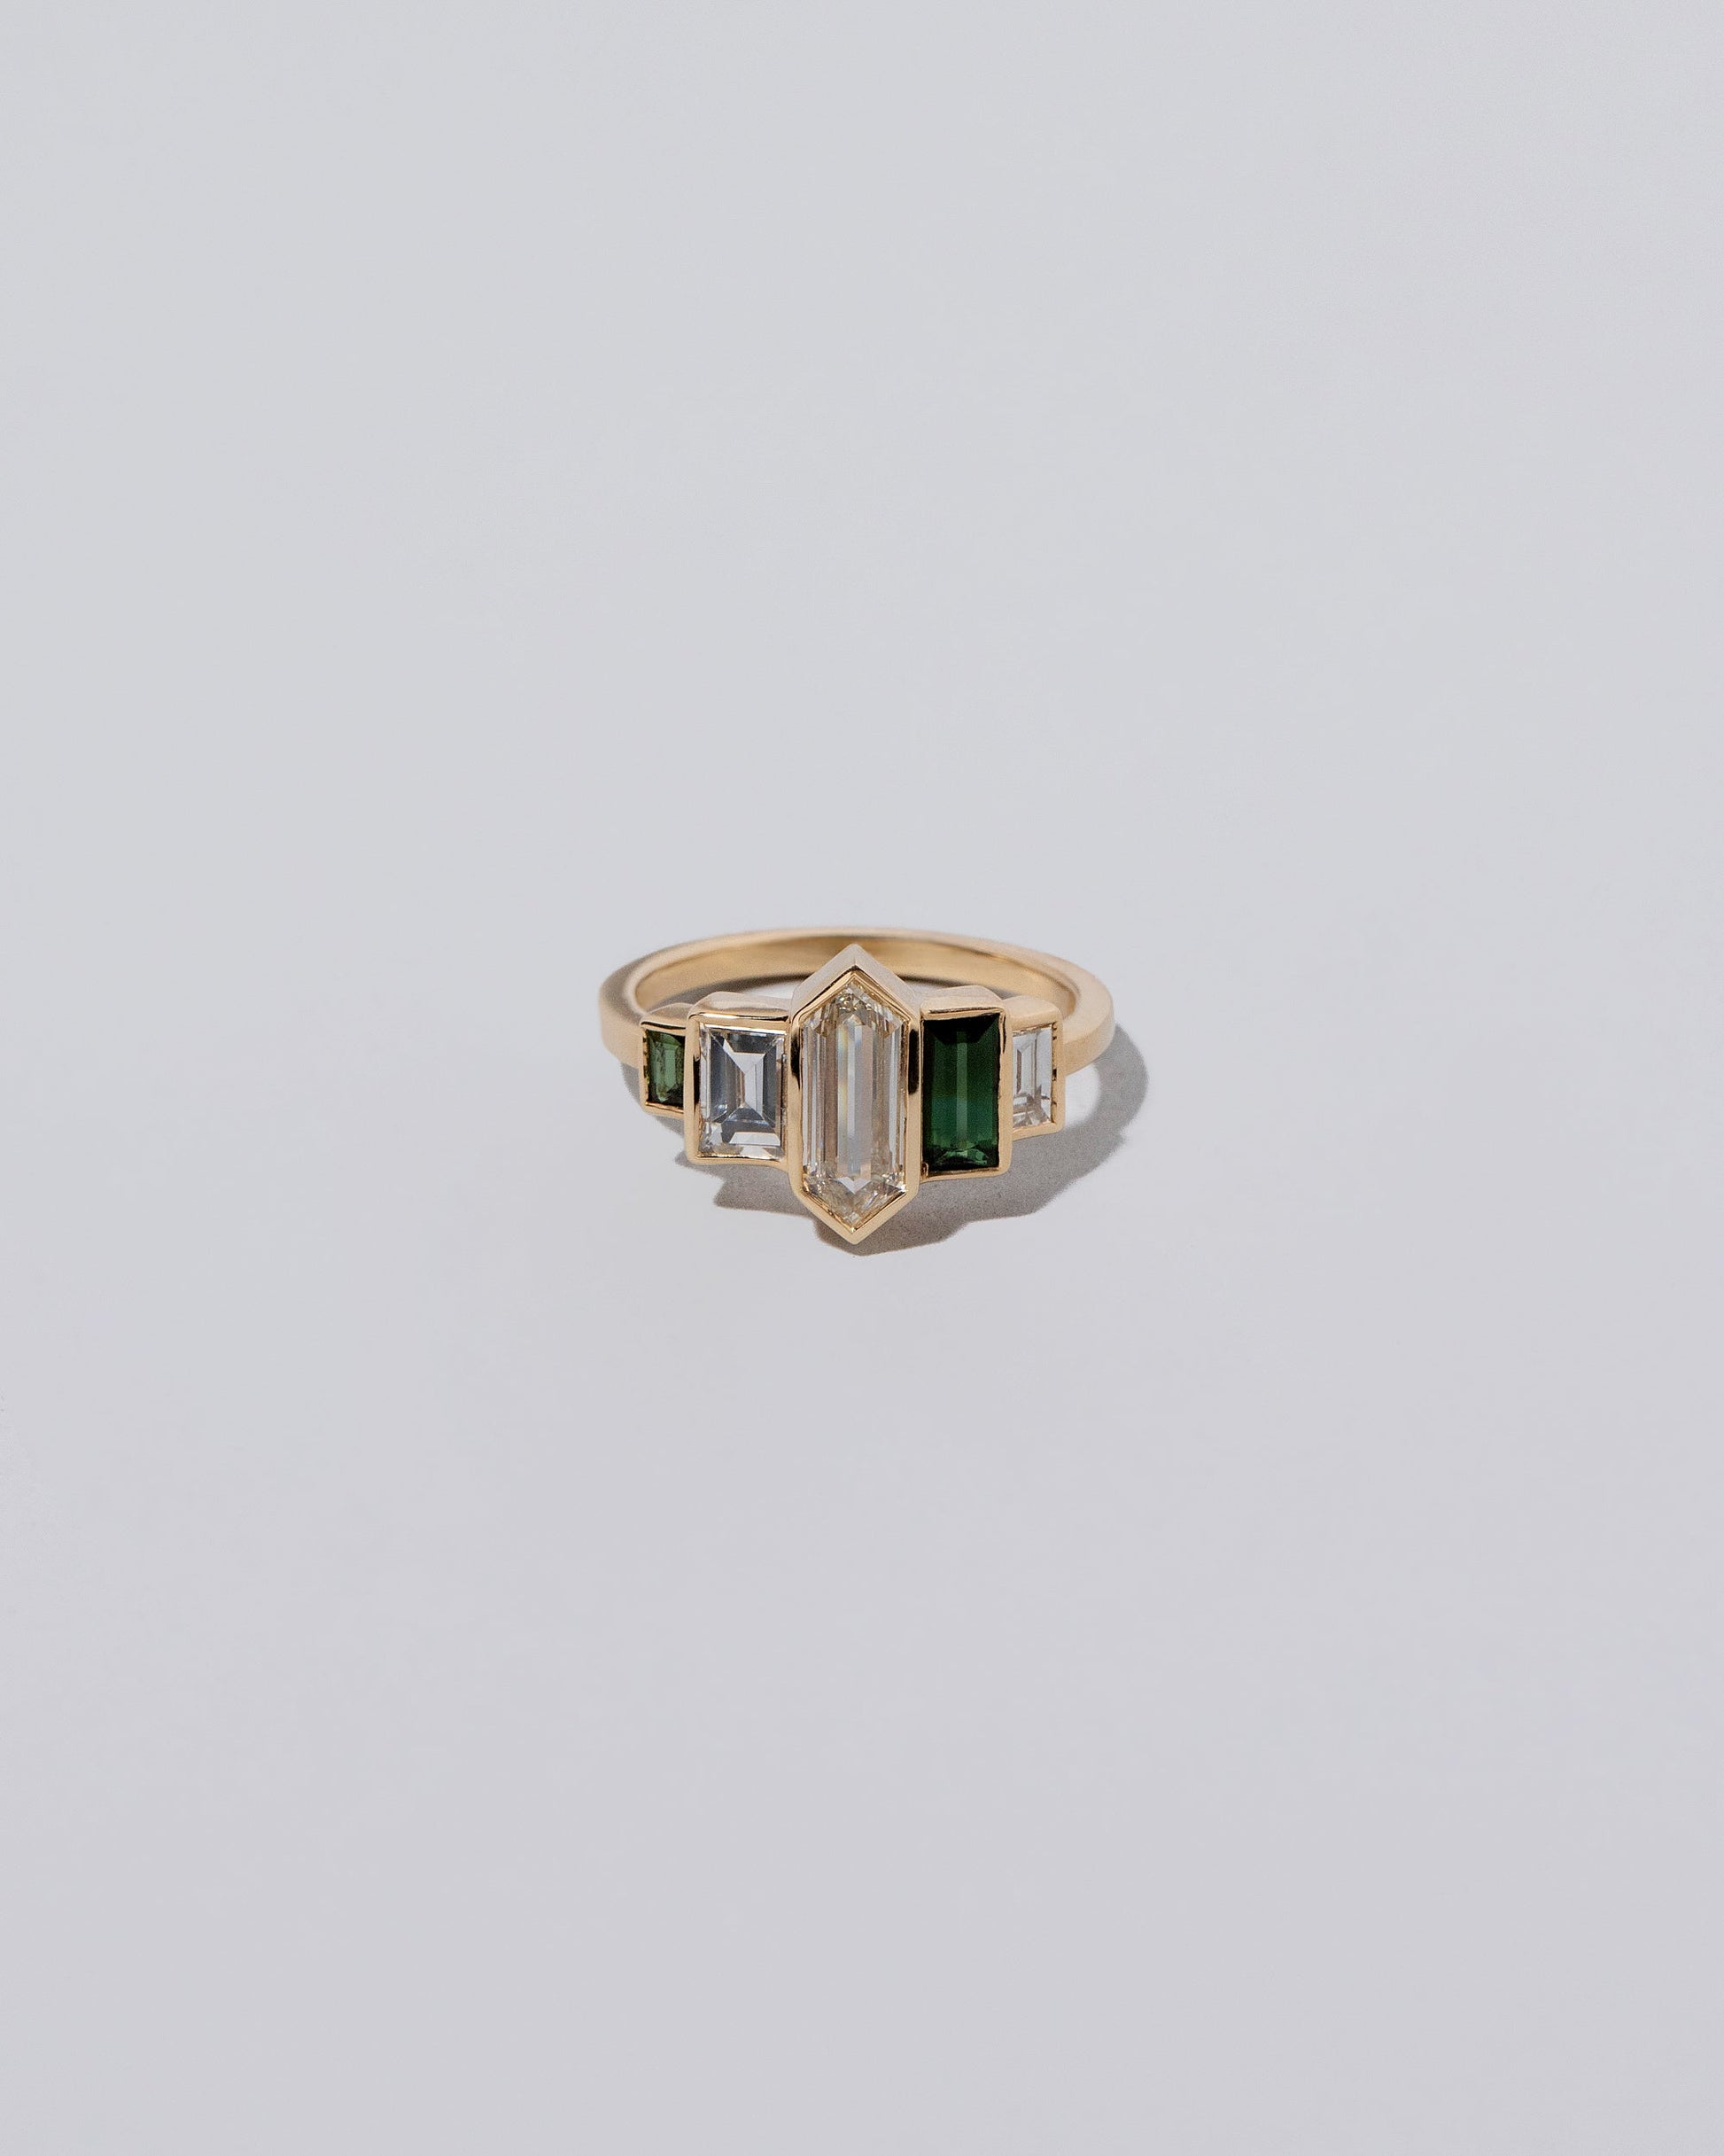 Product photo of Palace Ring on light color background